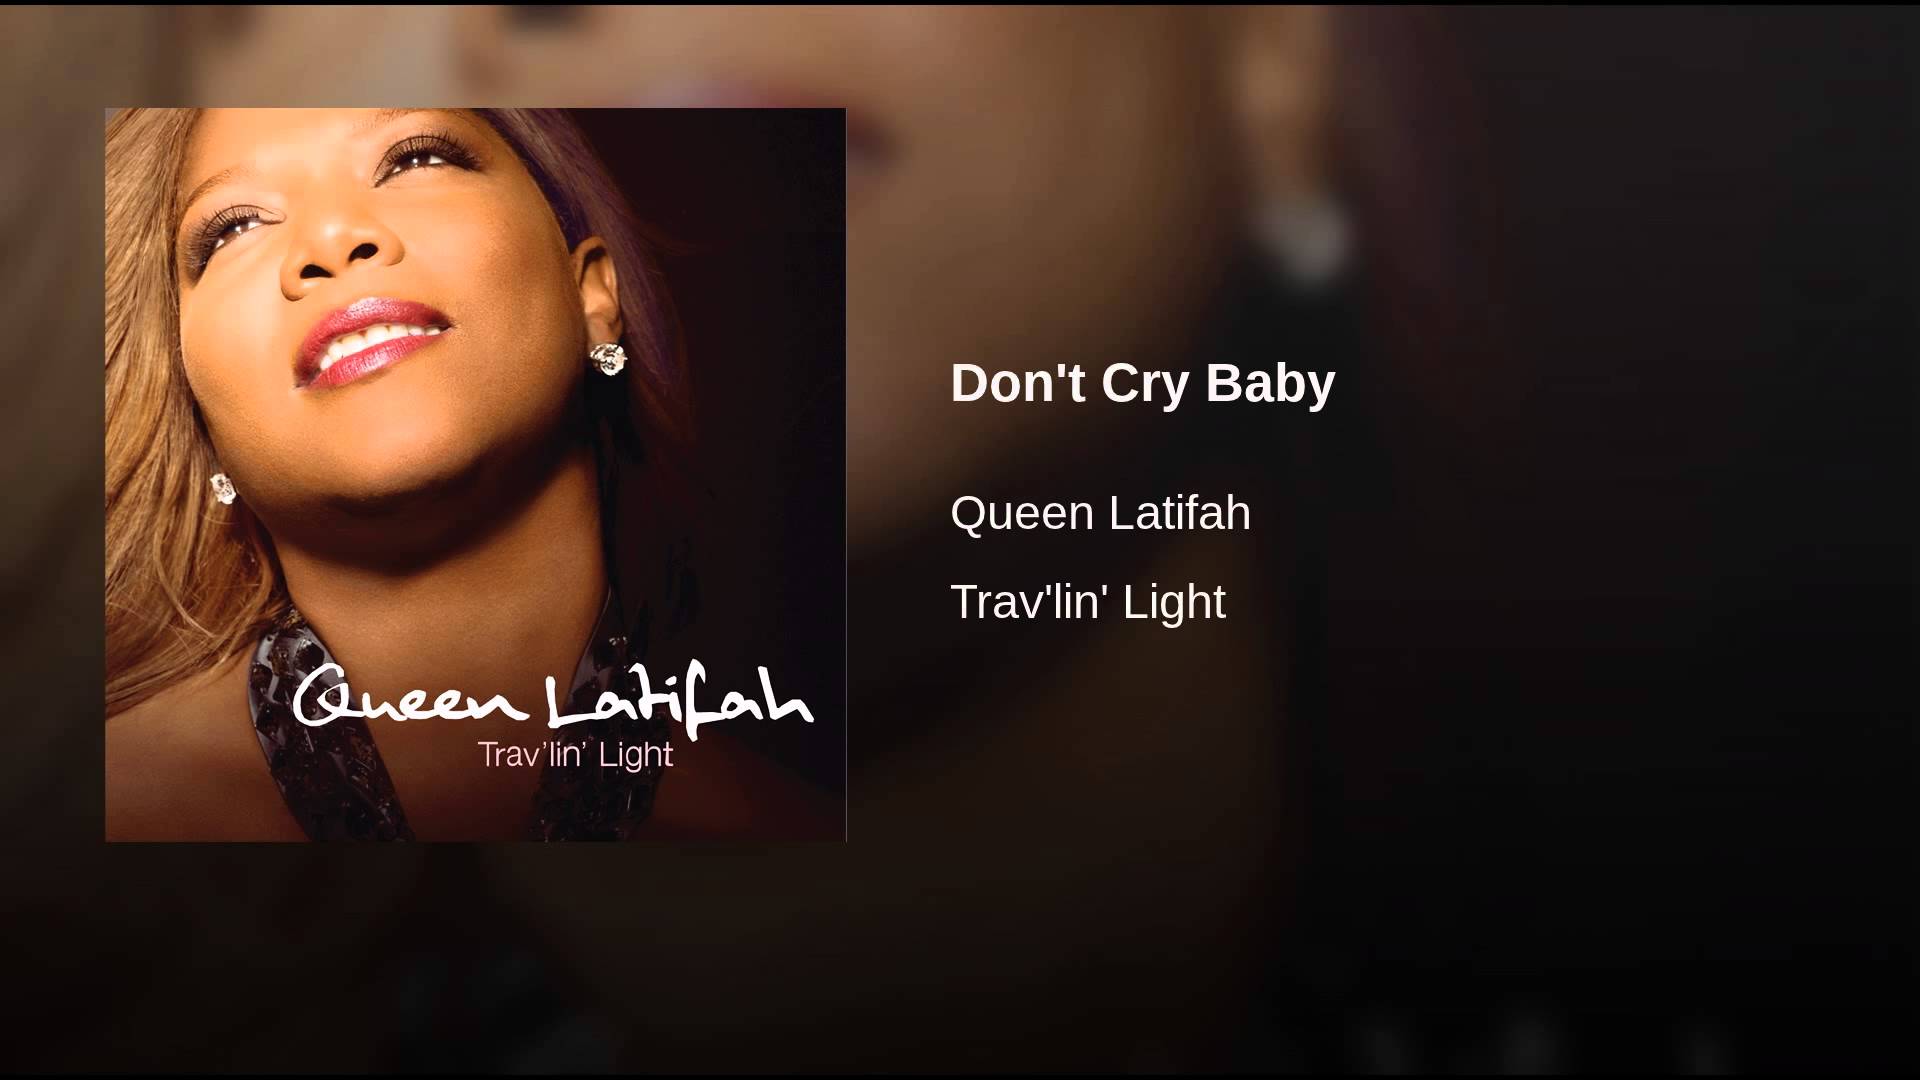 Don't Cry Baby - YouTube